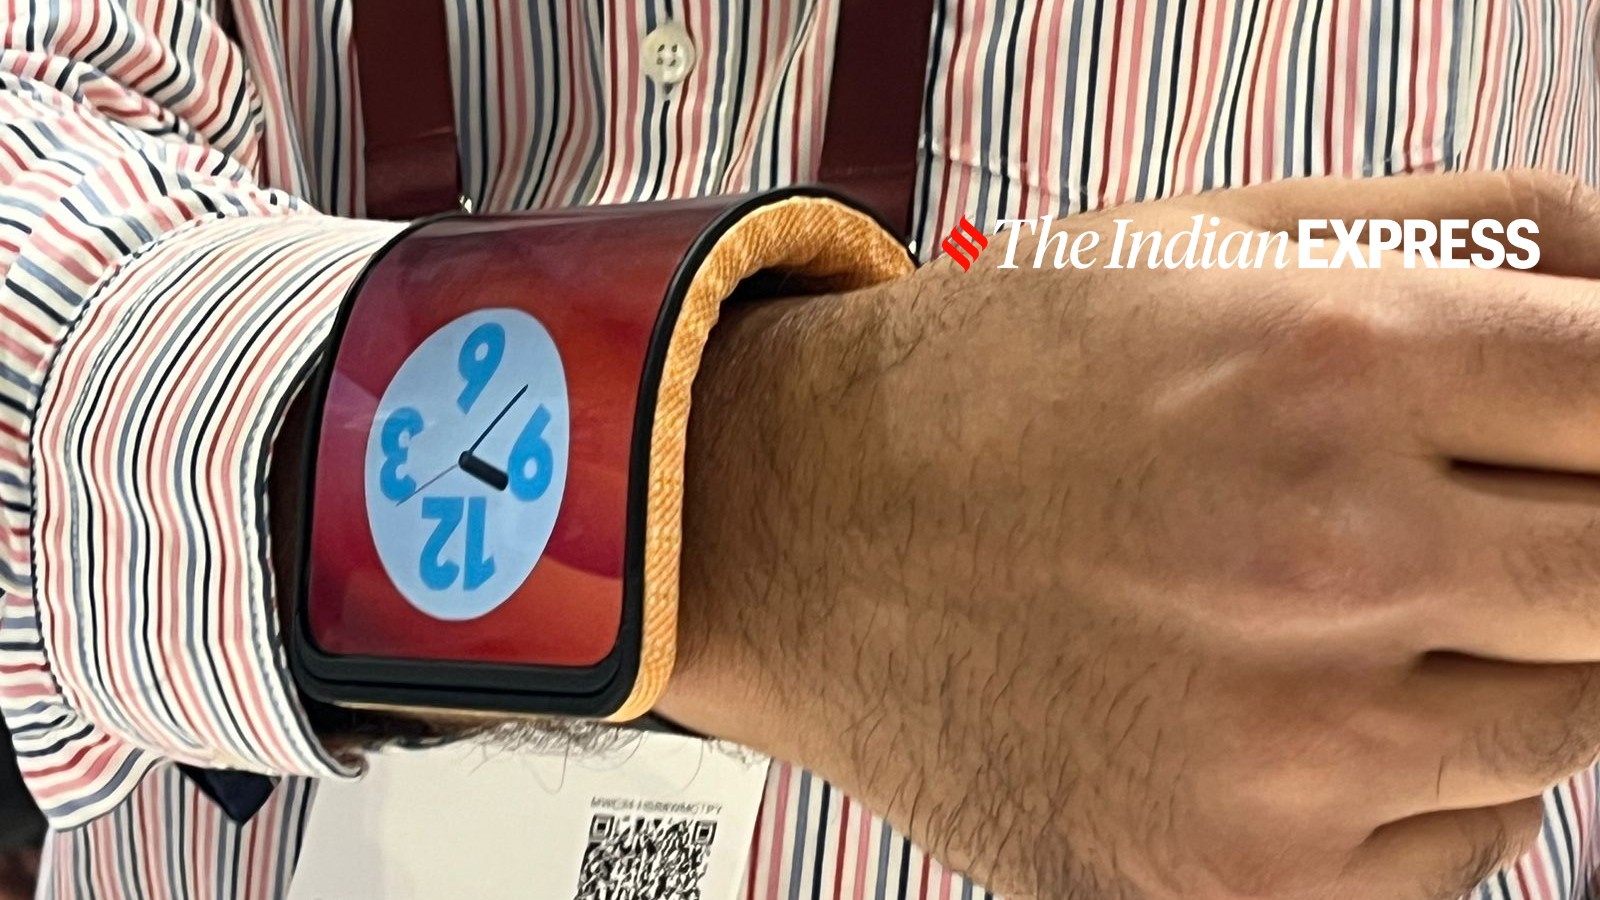 Rollerphone Bracelet Phone is Actually a Wrist Band With a Flexible Display  - Concept Phones